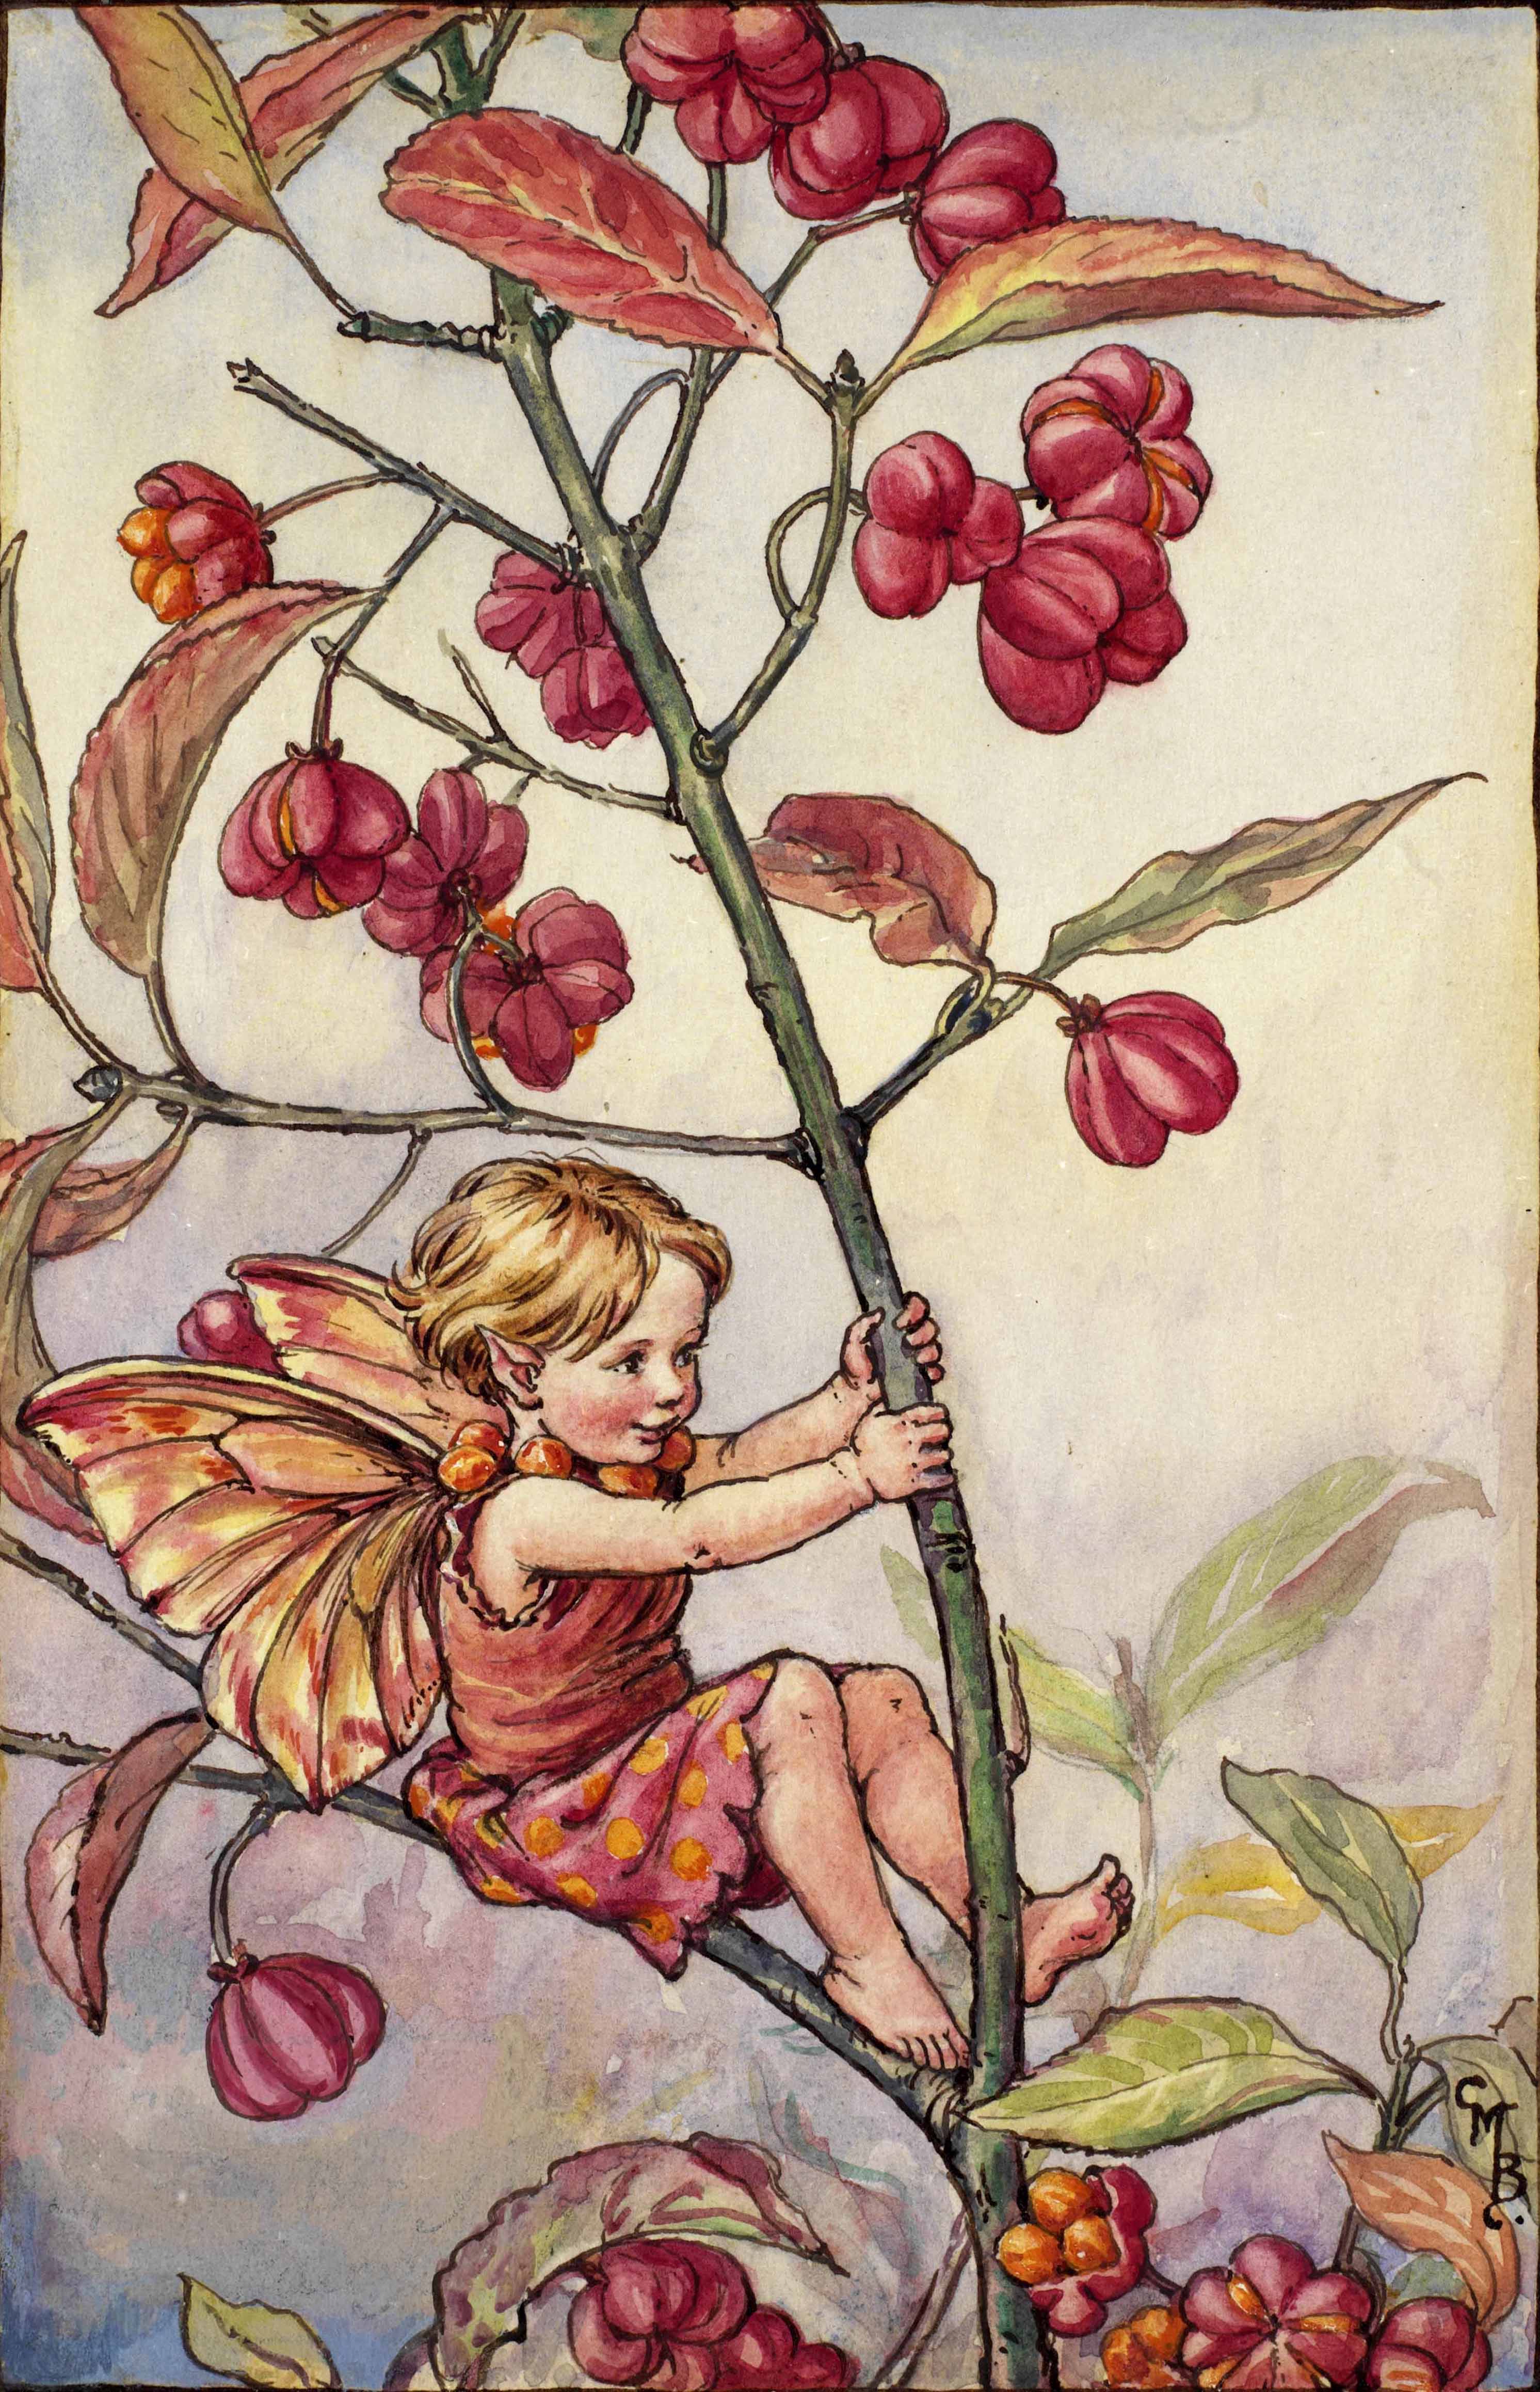 Spindle berry flower fairies